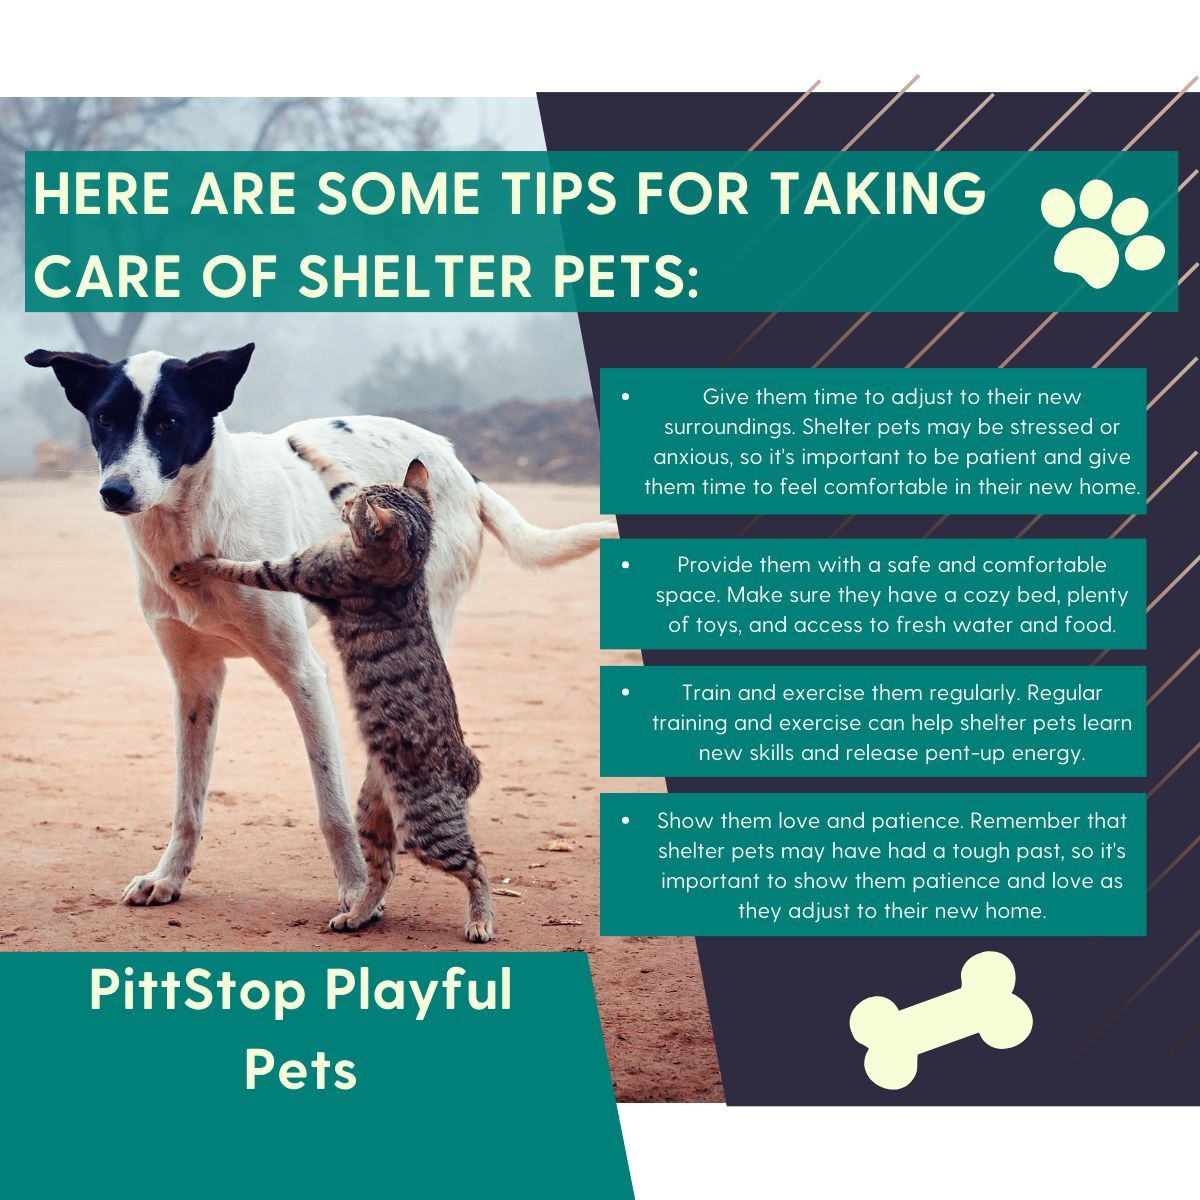 🐾 Welcome your new Shelter Pet into their new home... Together, let's give these rescues the warmest welcome! 🏡❤️ #ShelterPet #FurEverHome #RescueLove #PetAdoption #FurryFriend #HappyTails #PittStopPlayfulPets

pittstopplayfulpets.com